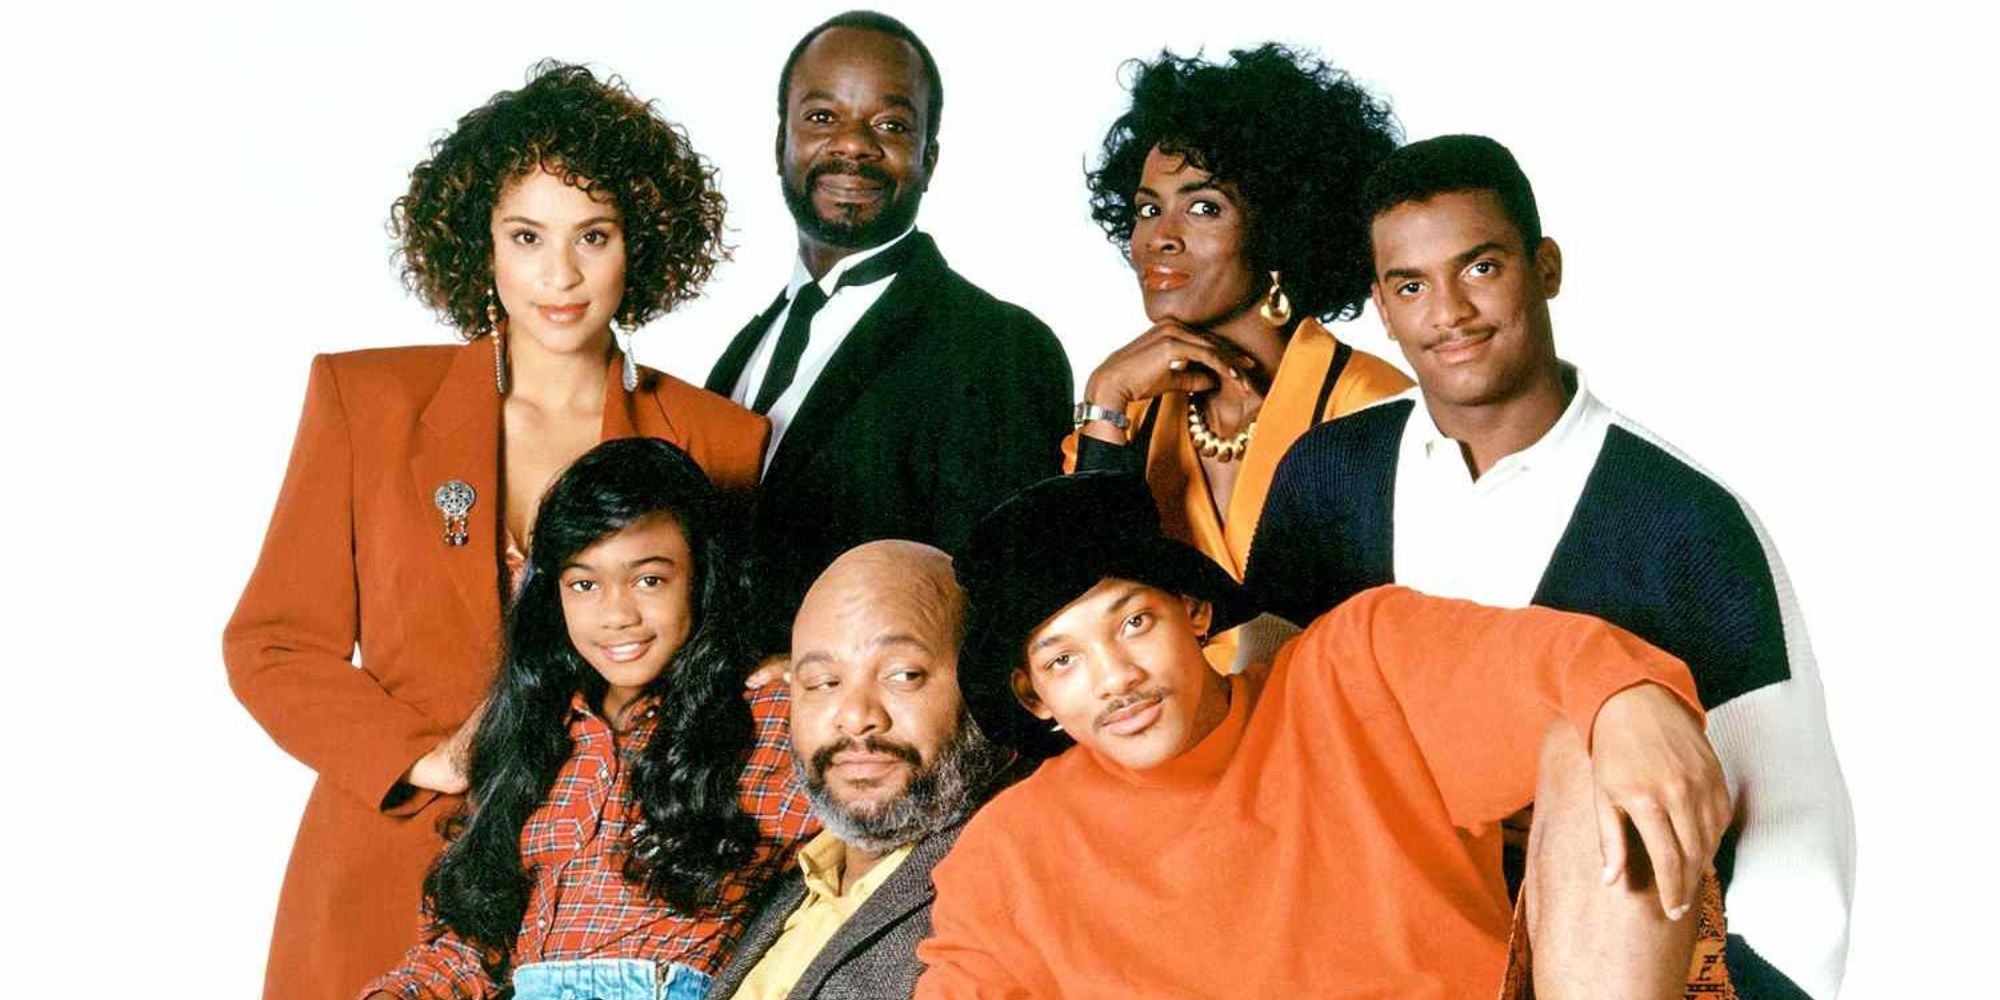 The cast of The Fresh Prince of Bel-Air in a promotional still.